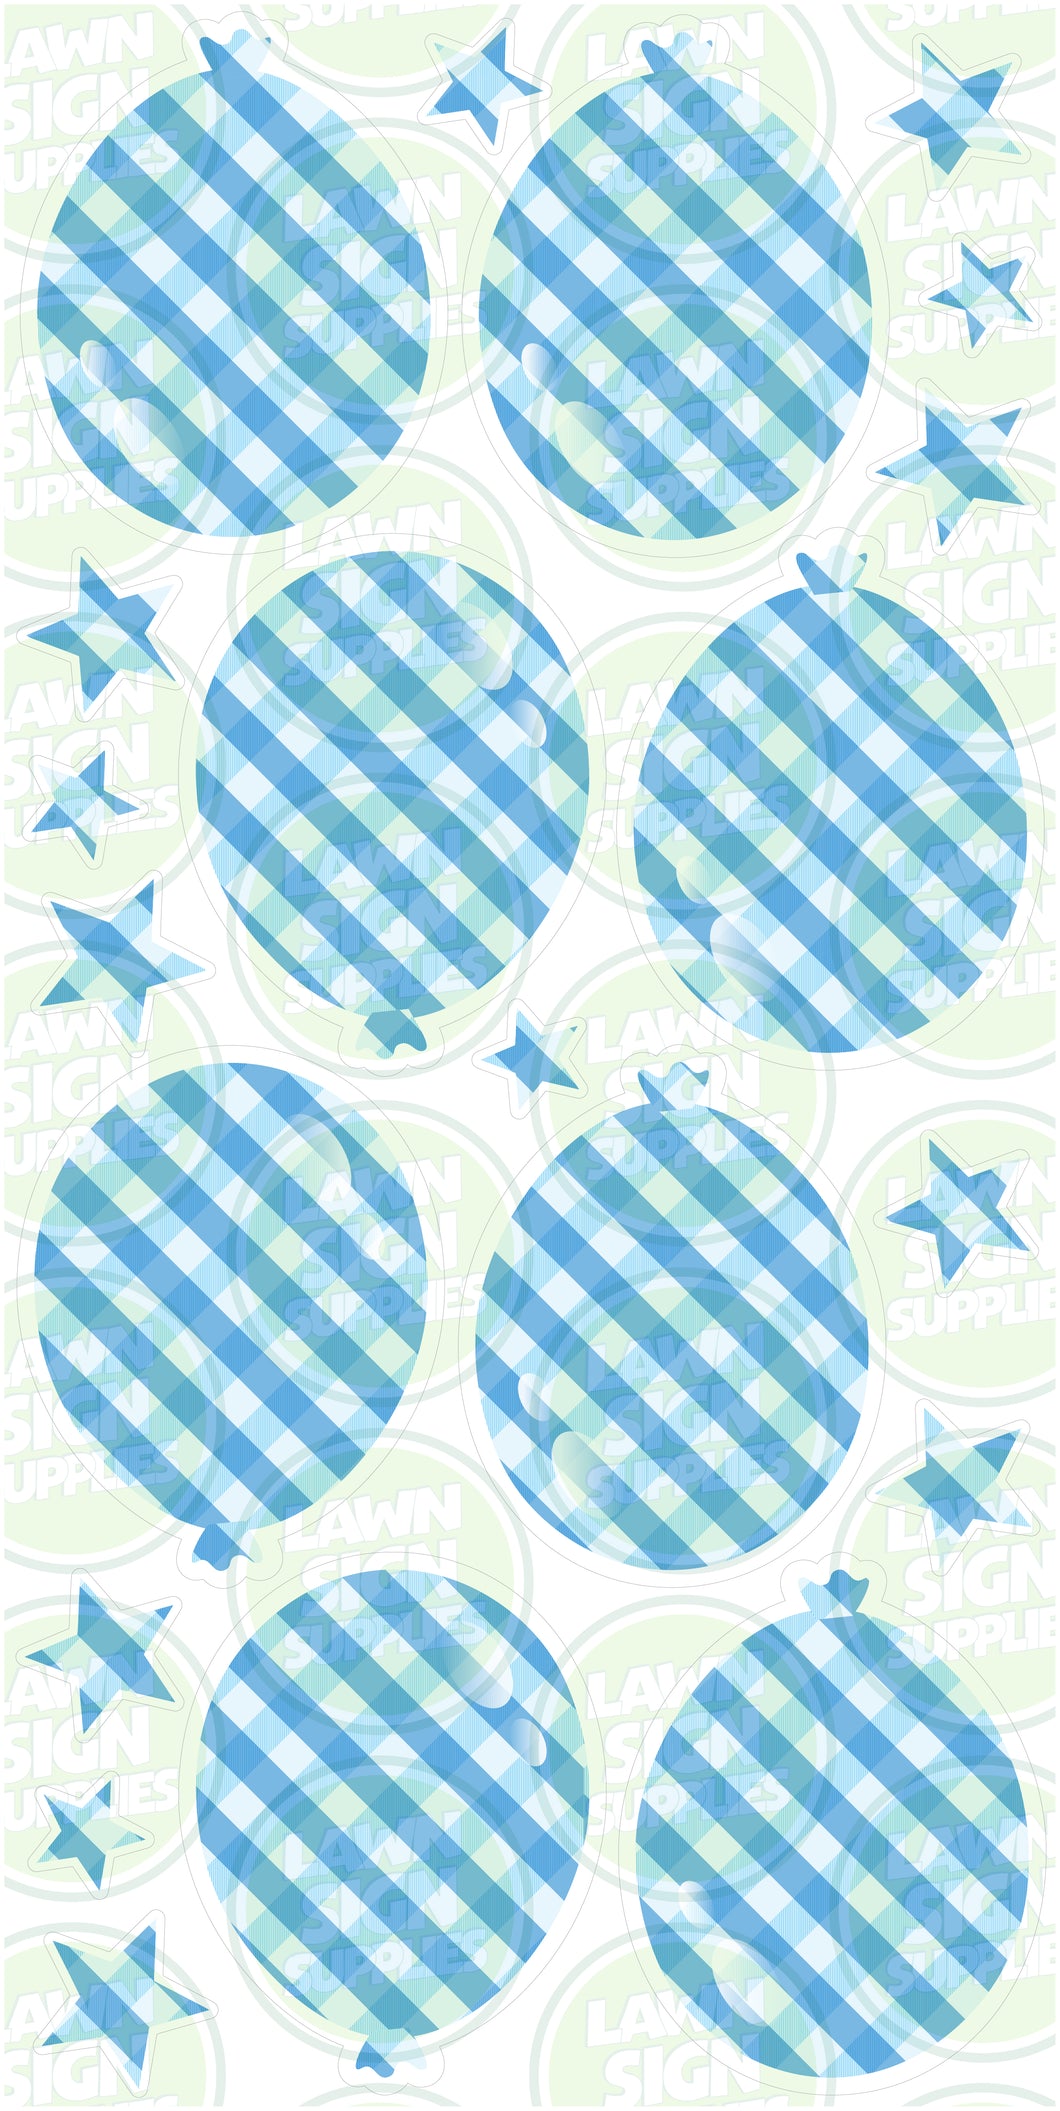 PATTERNED BALLOONS - BLUE GINGHAM